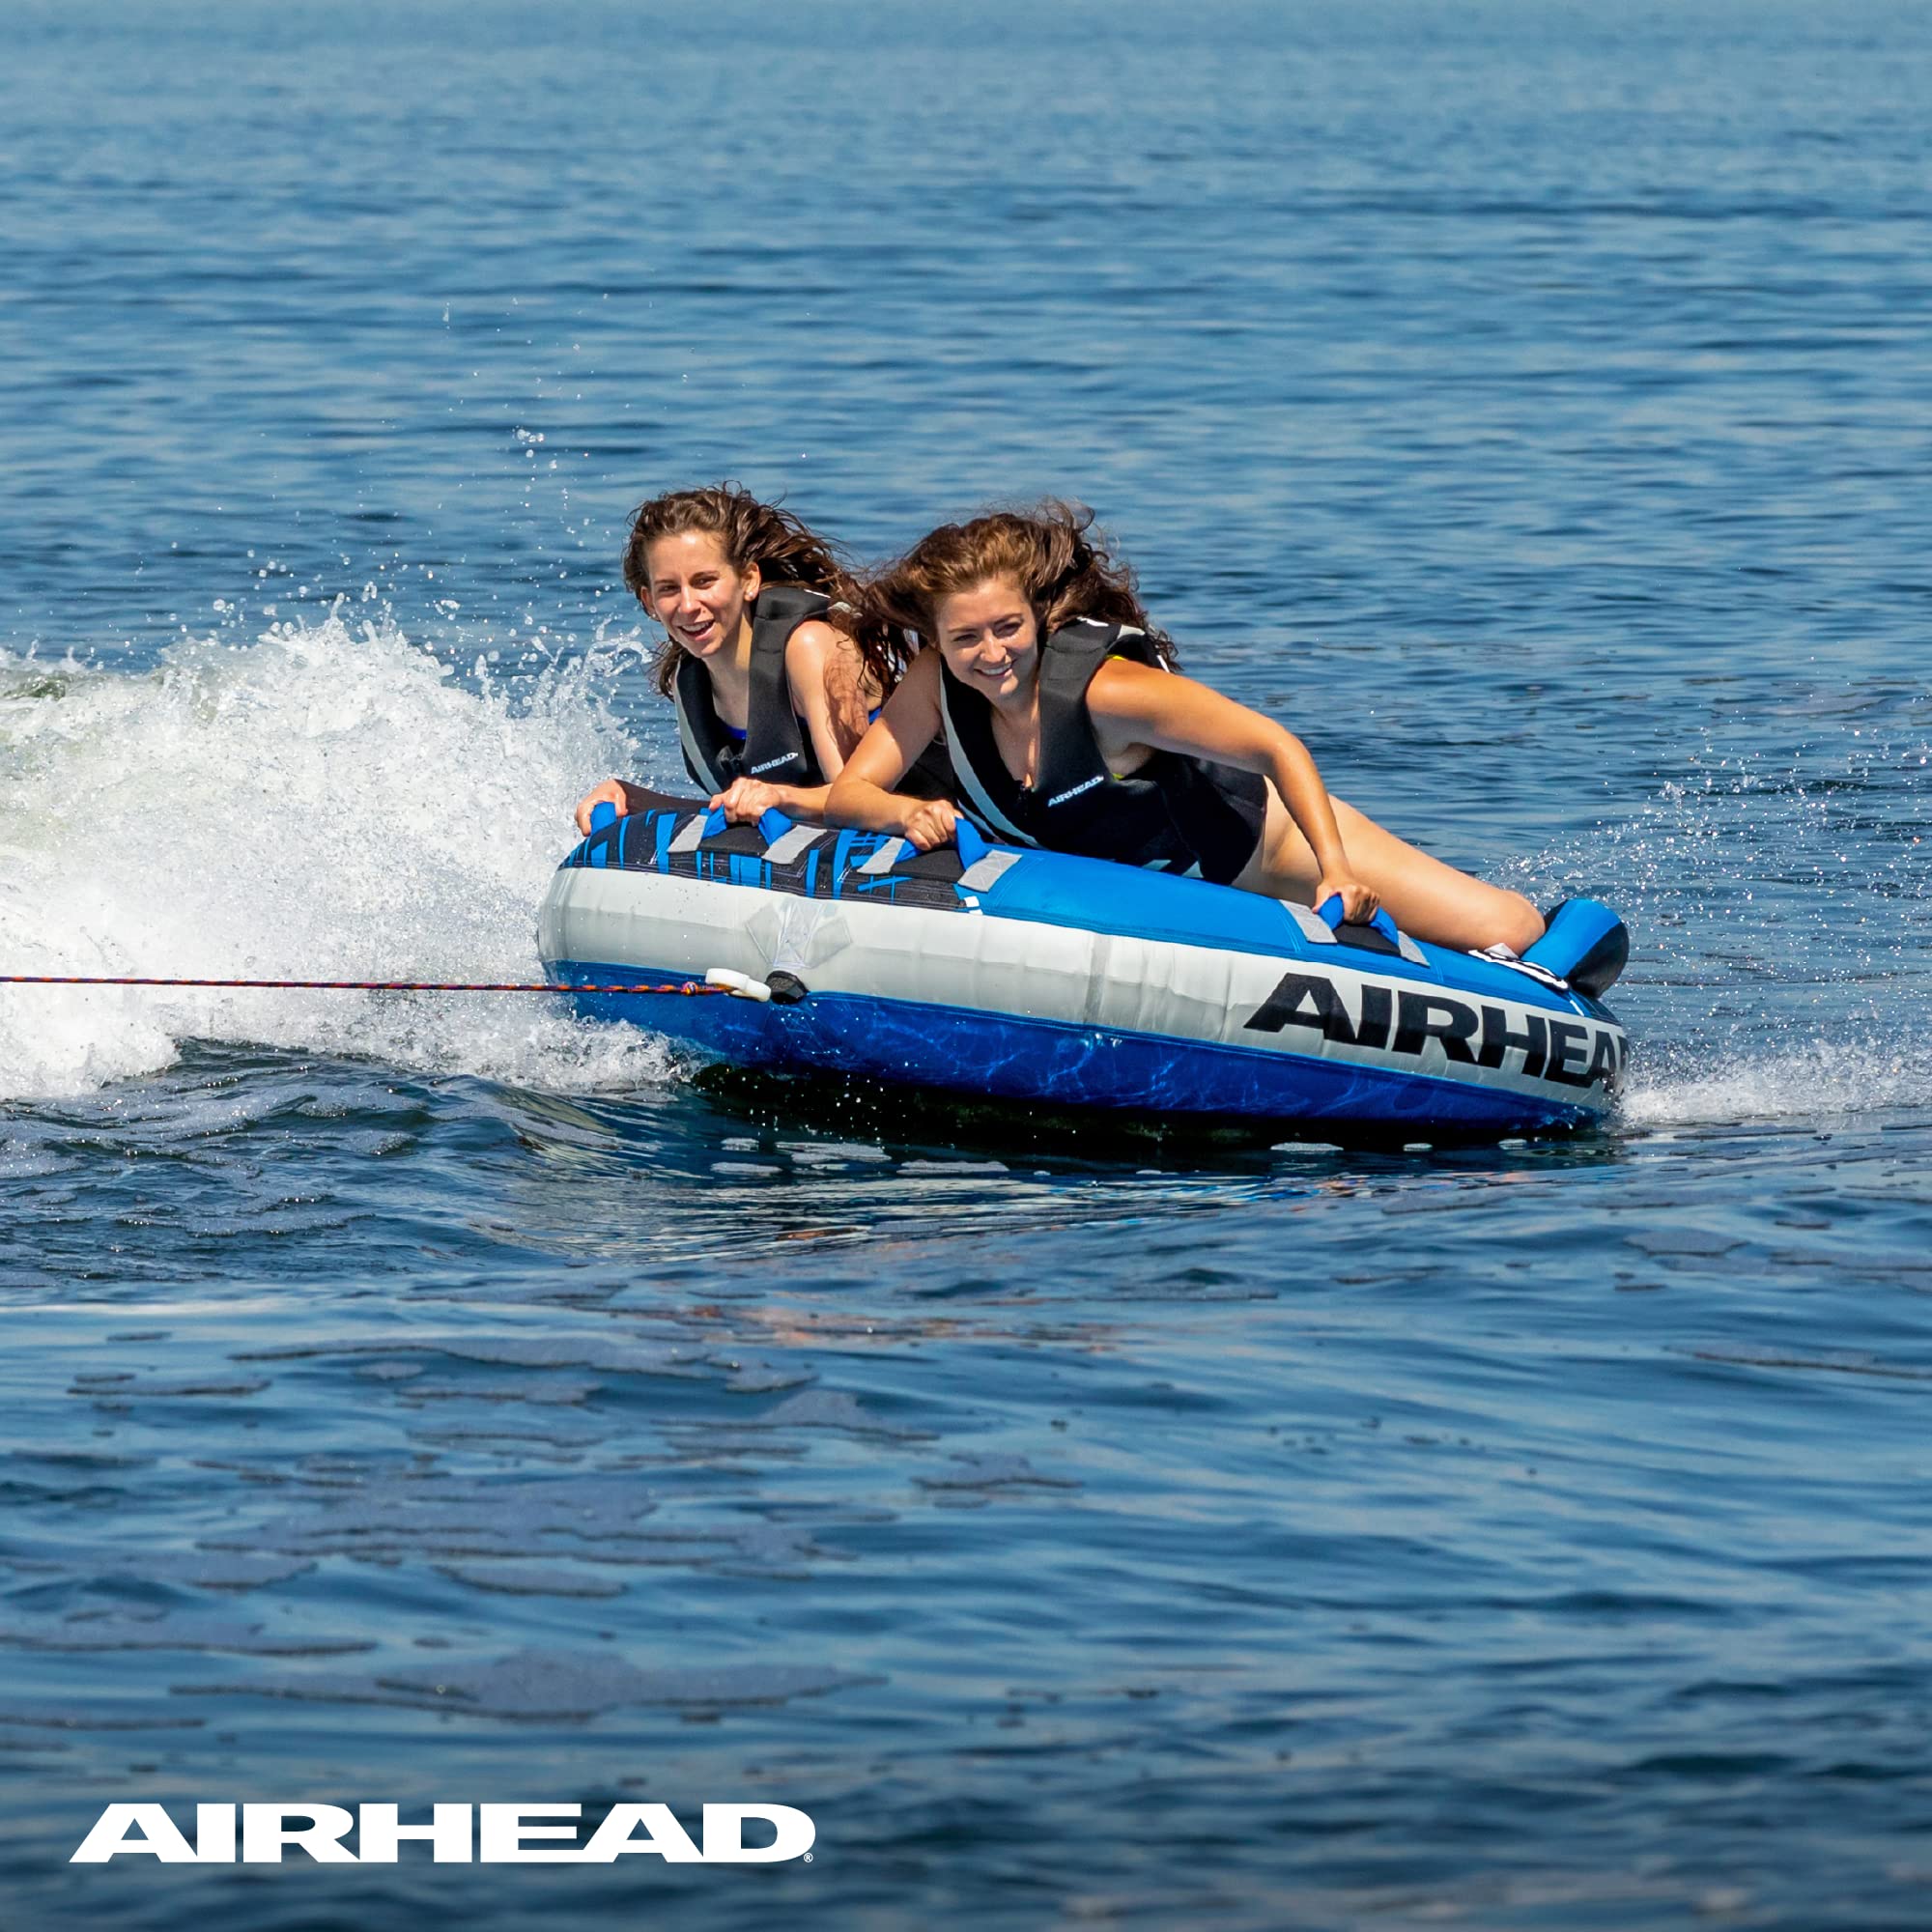 AIRHEAD G-Force Towable Tube for Boating, Multiple Size Options Available